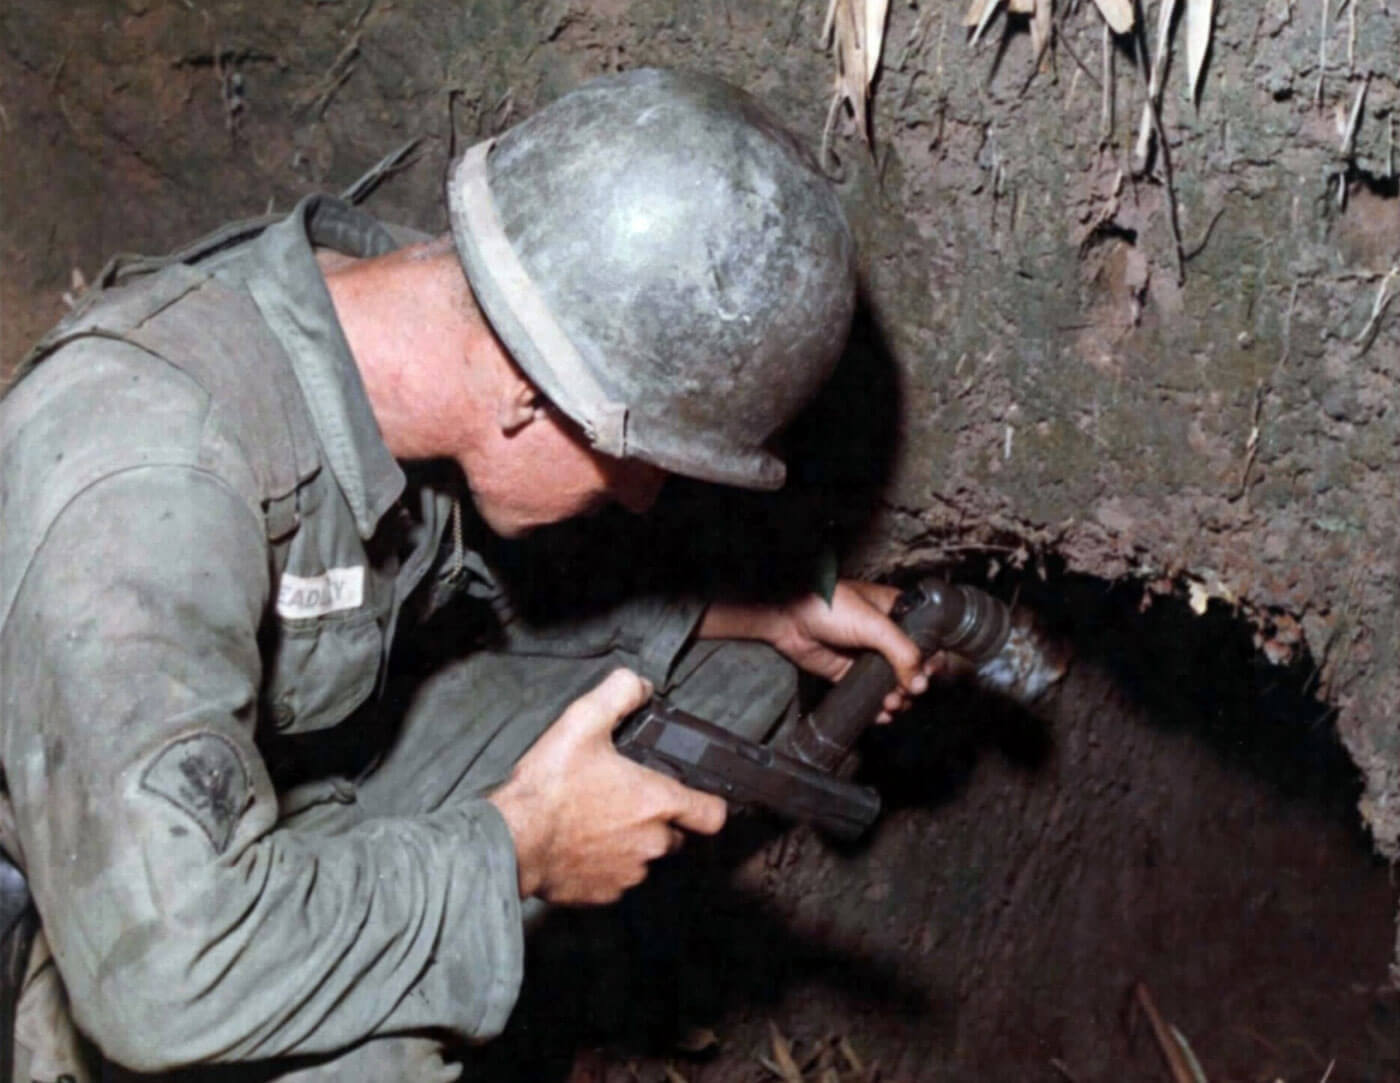 The Iron Triangle was a 120 square miles area in the Bình Dương Province of Vietnam, so named due to it being a stronghold of Viet Minh activity during the war. There was a large tunnel network that had to be cleared out by the 173rd Airborne Brigade commanded by Maj. Ellis W. Williamson. Ellis W. Williamson was a United States Army Major General who served in World War II, the Korean War and the Vietnam War. He led the 173rd Airborne Brigade, the first US Army unit to deploy to South Vietnam and later commanded the 25th Infantry Division there.